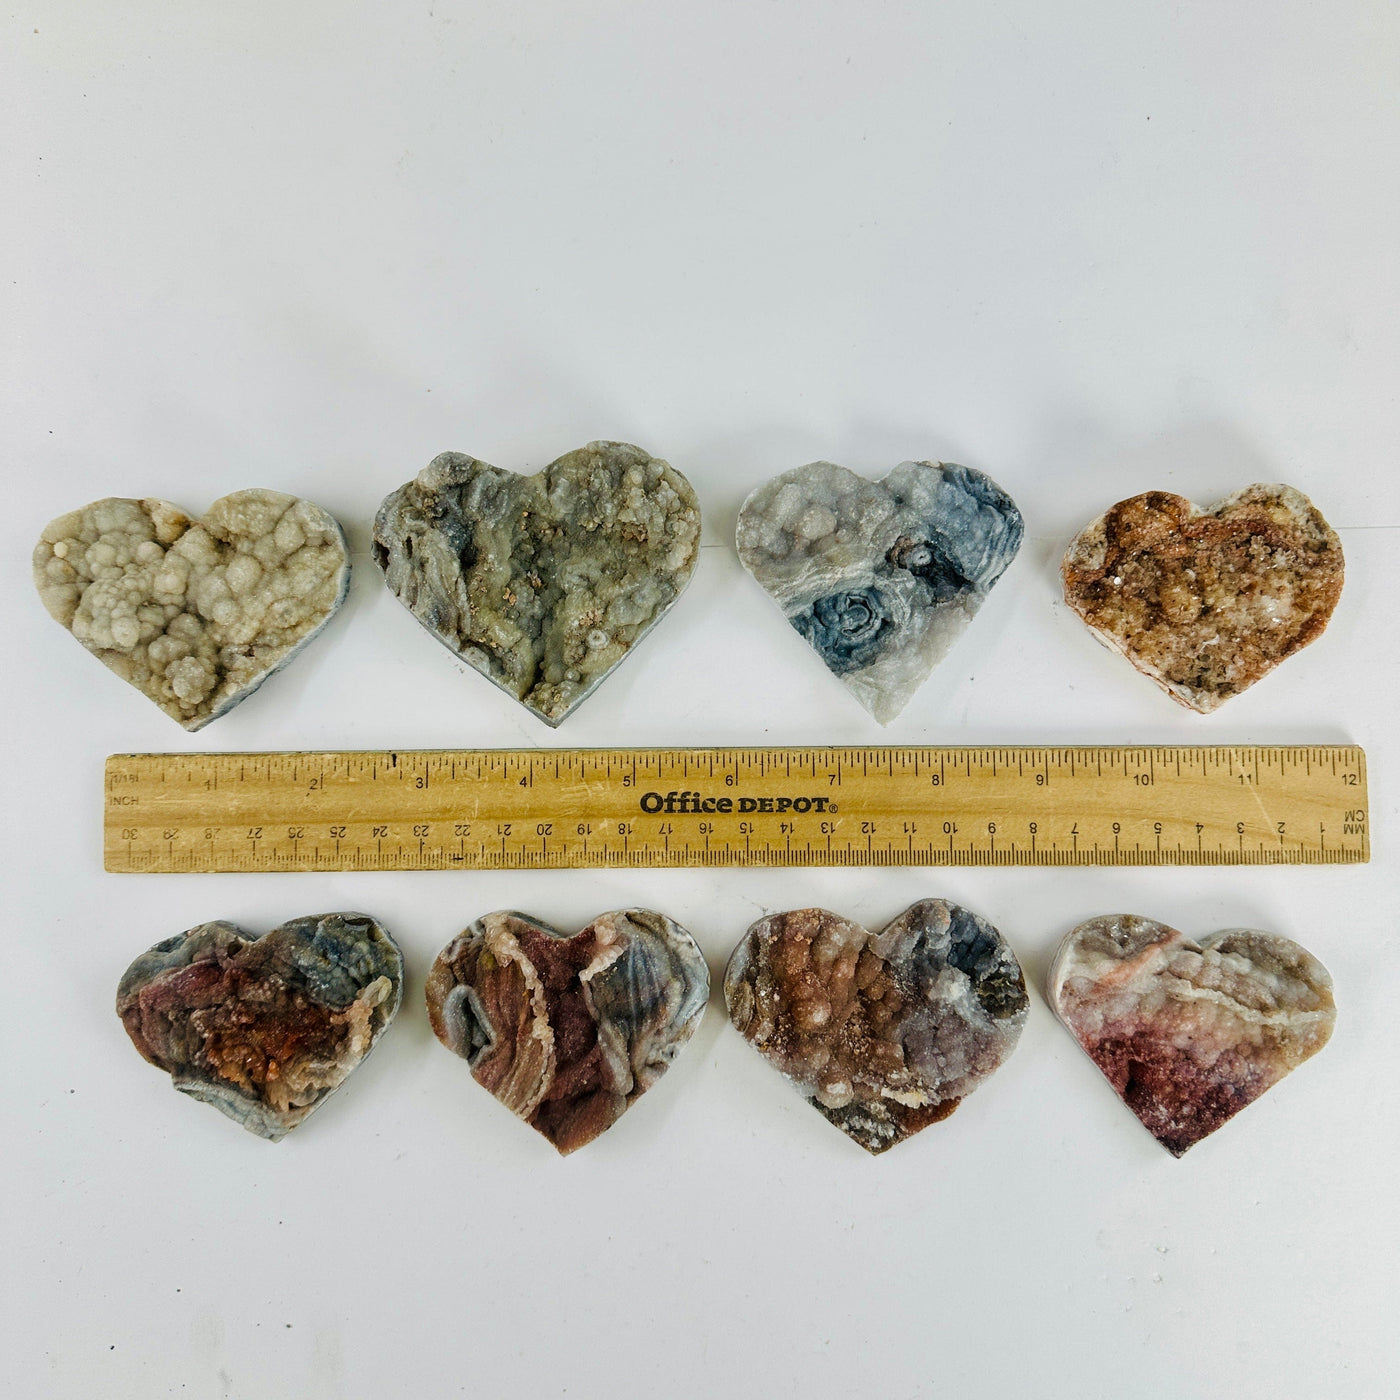 Sugar Druzy Crystal Heart - You Choose all hearts with ruler for size reference